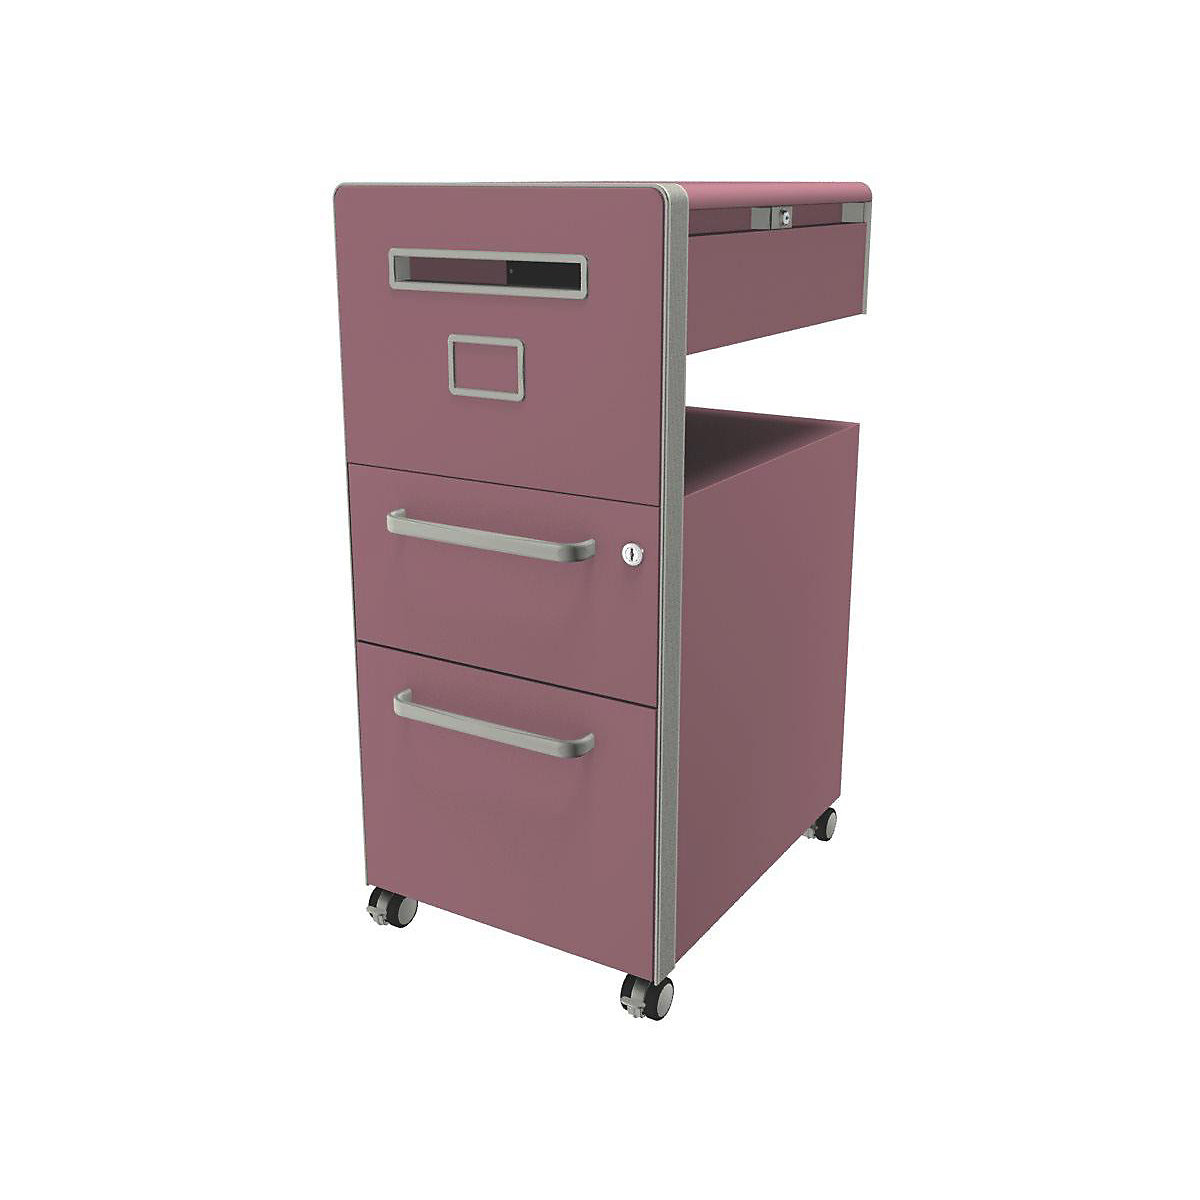 Bite™ pedestal furniture, with 1 pin board, opens on the left side – BISLEY, with 1 universal drawer, 1 suspension file drawer, pink-22